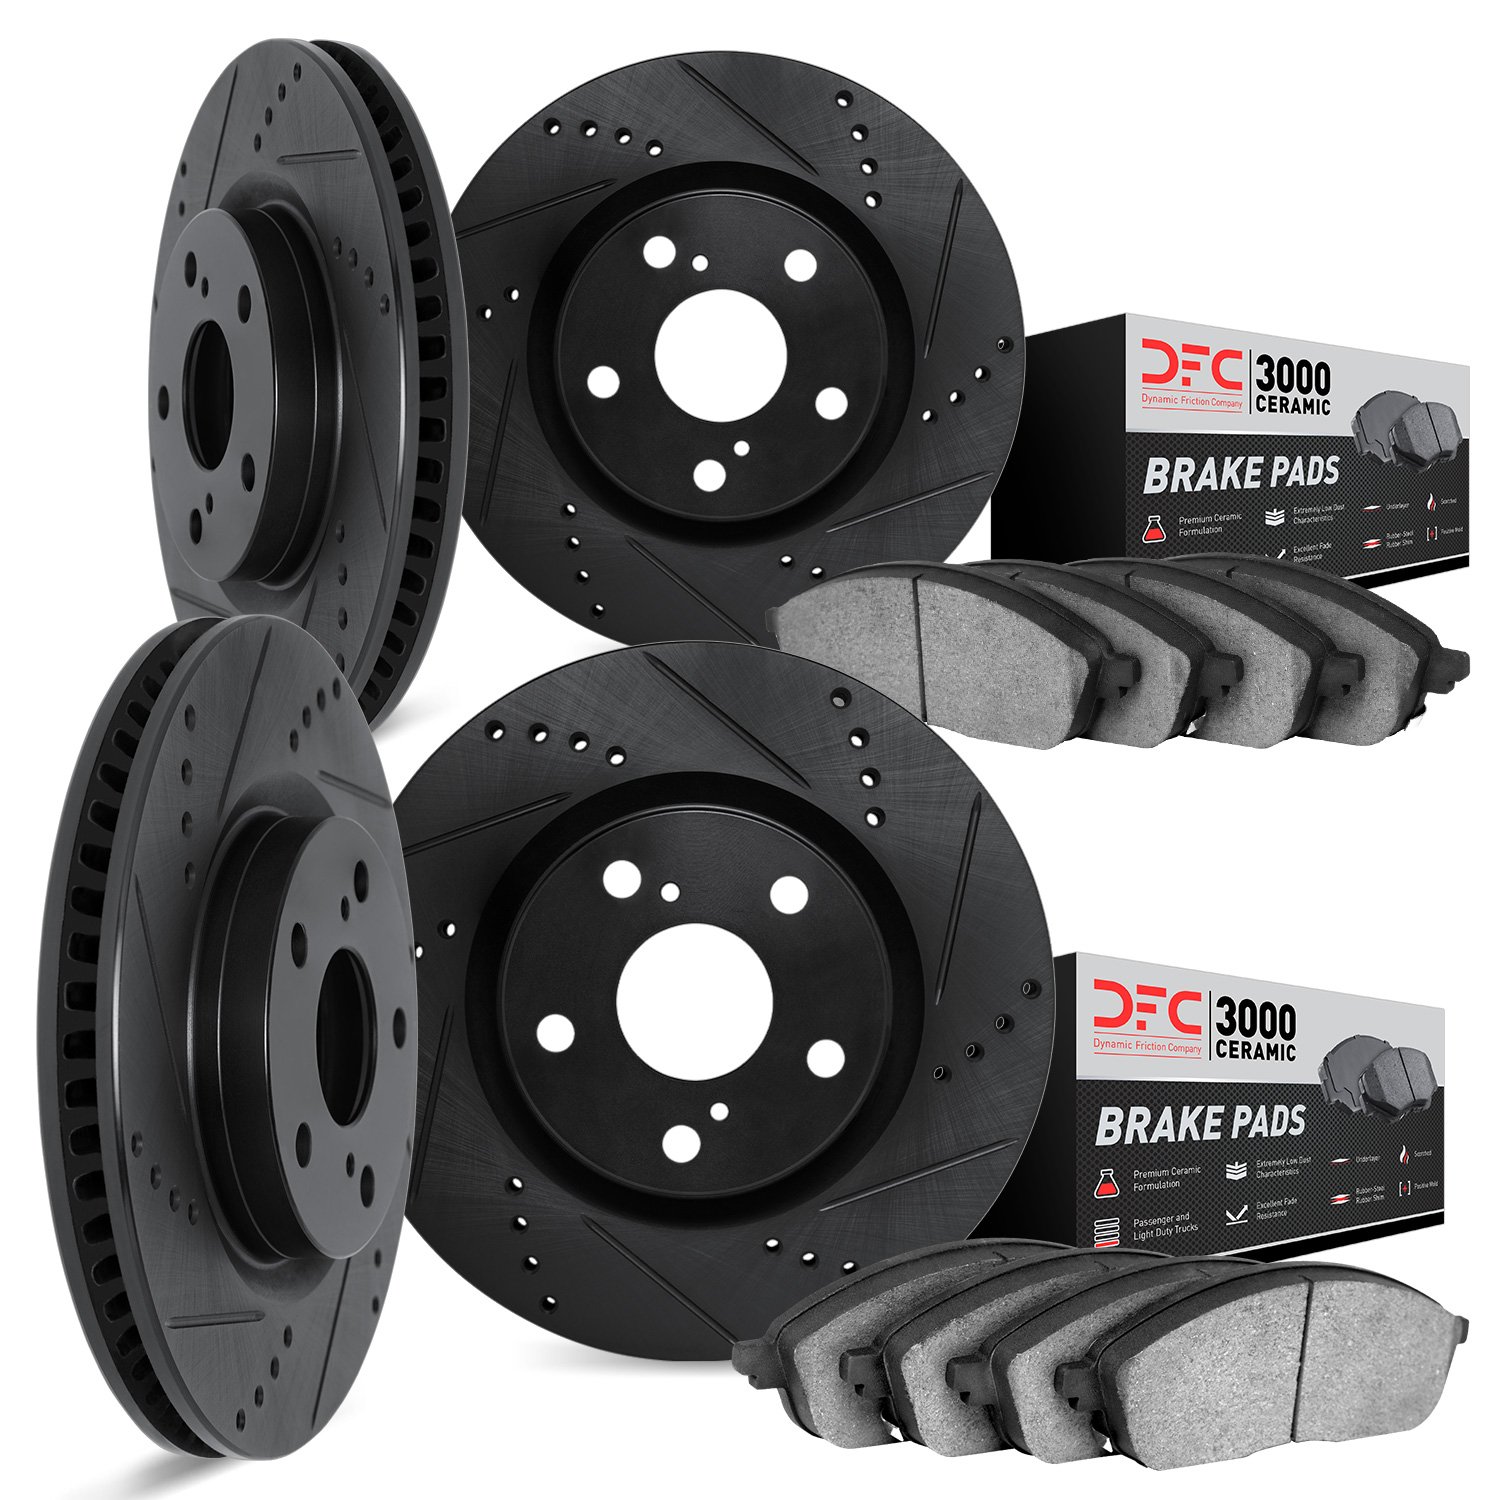 8304-31052 Drilled/Slotted Brake Rotors with 3000-Series Ceramic Brake Pads Kit [Black], 2007-2015 BMW, Position: Front and Rear